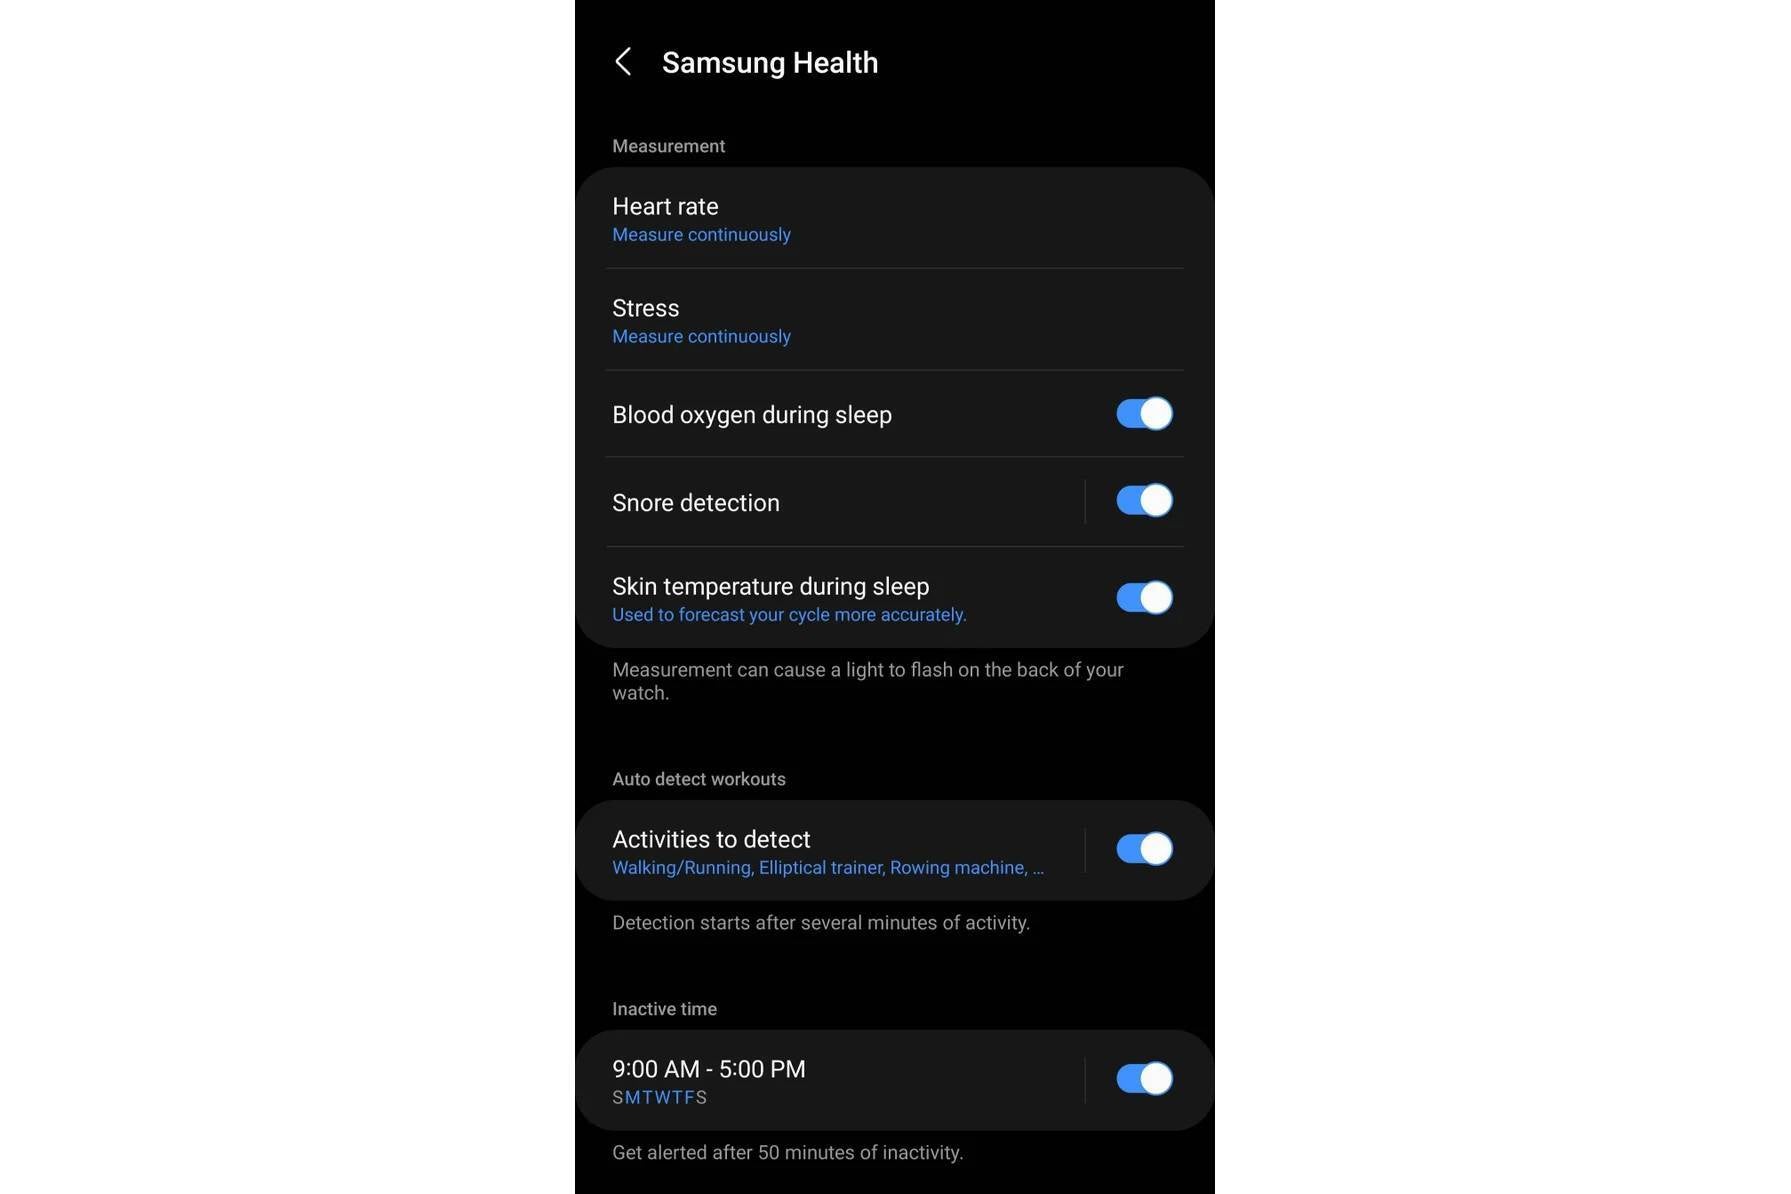 Latest Samsung Health app update suggests Galaxy Watch 5 will get a temperature sensor - Evidence of Galaxy Watch 5 thermometer feature shows up in Samsung Health app